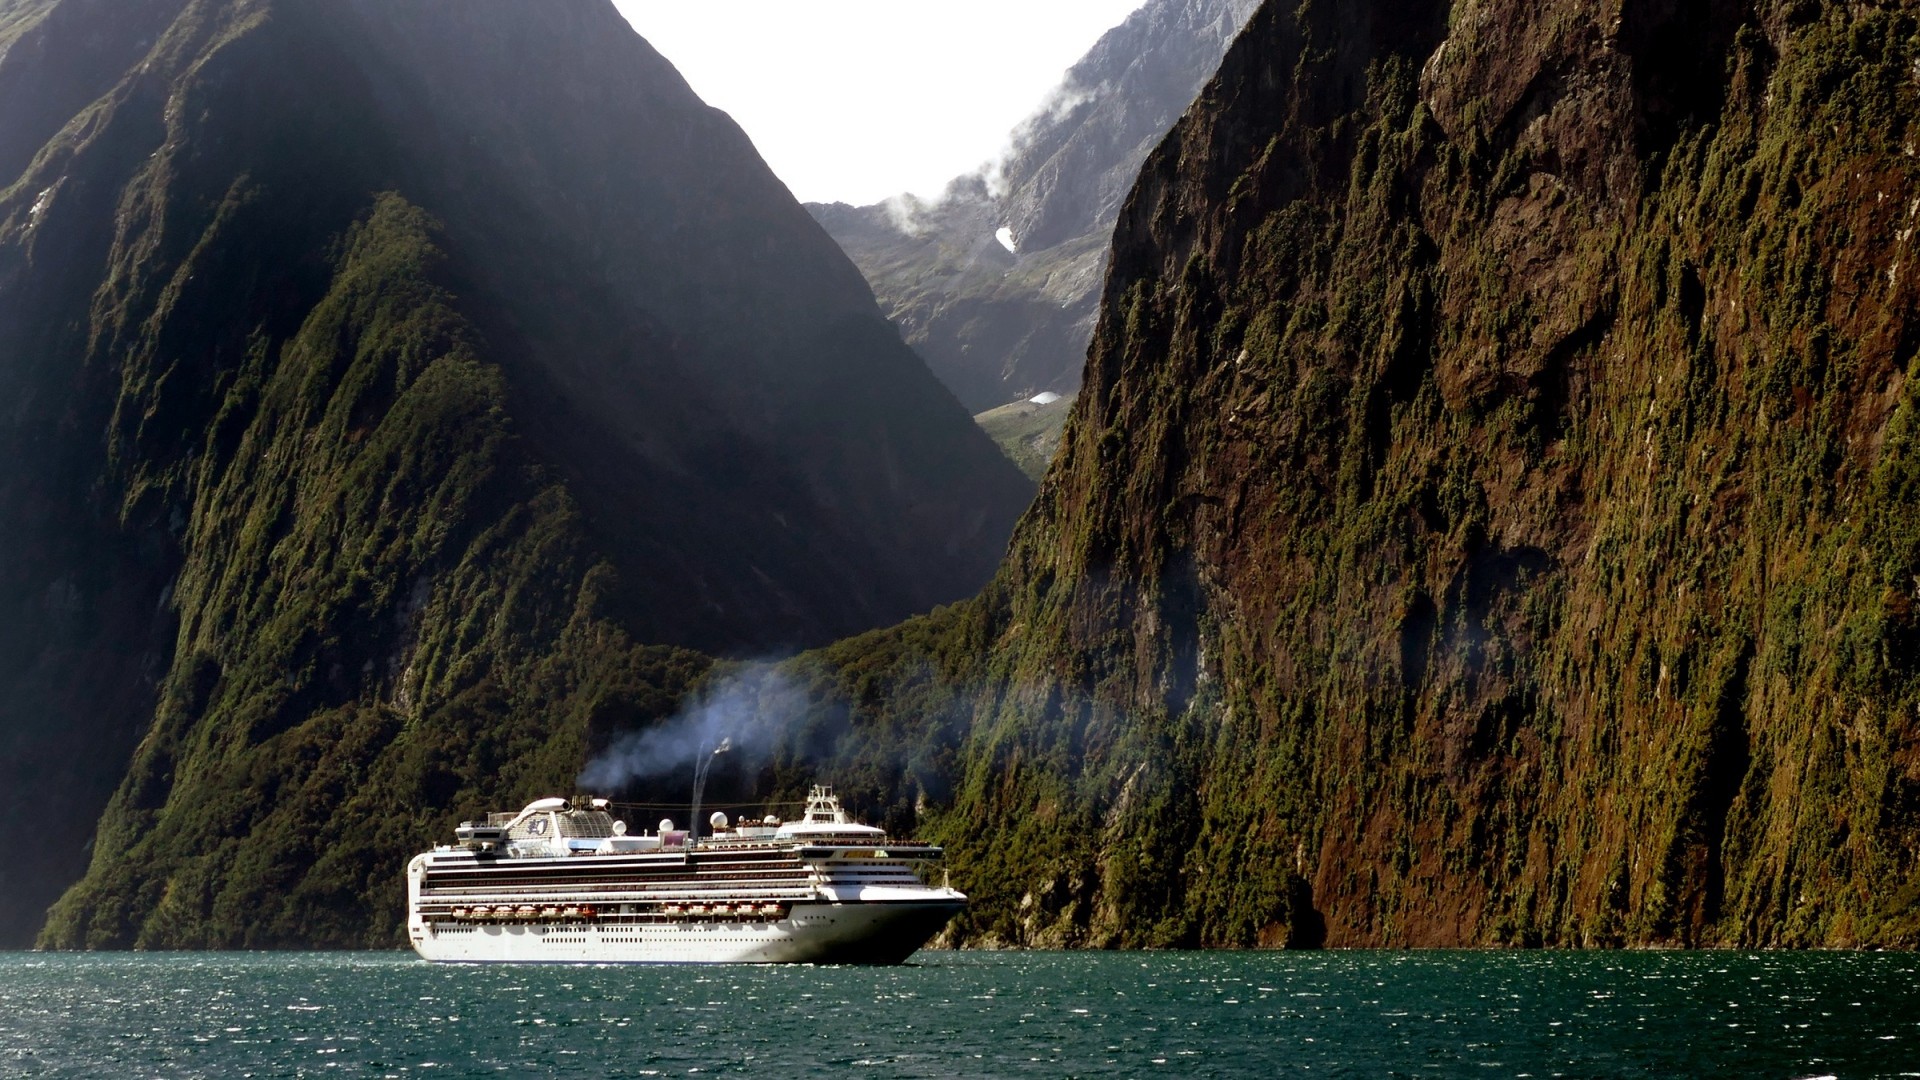 General 1920x1080 nature landscape sea New Zealand cruise ship mountains smoke trees forest